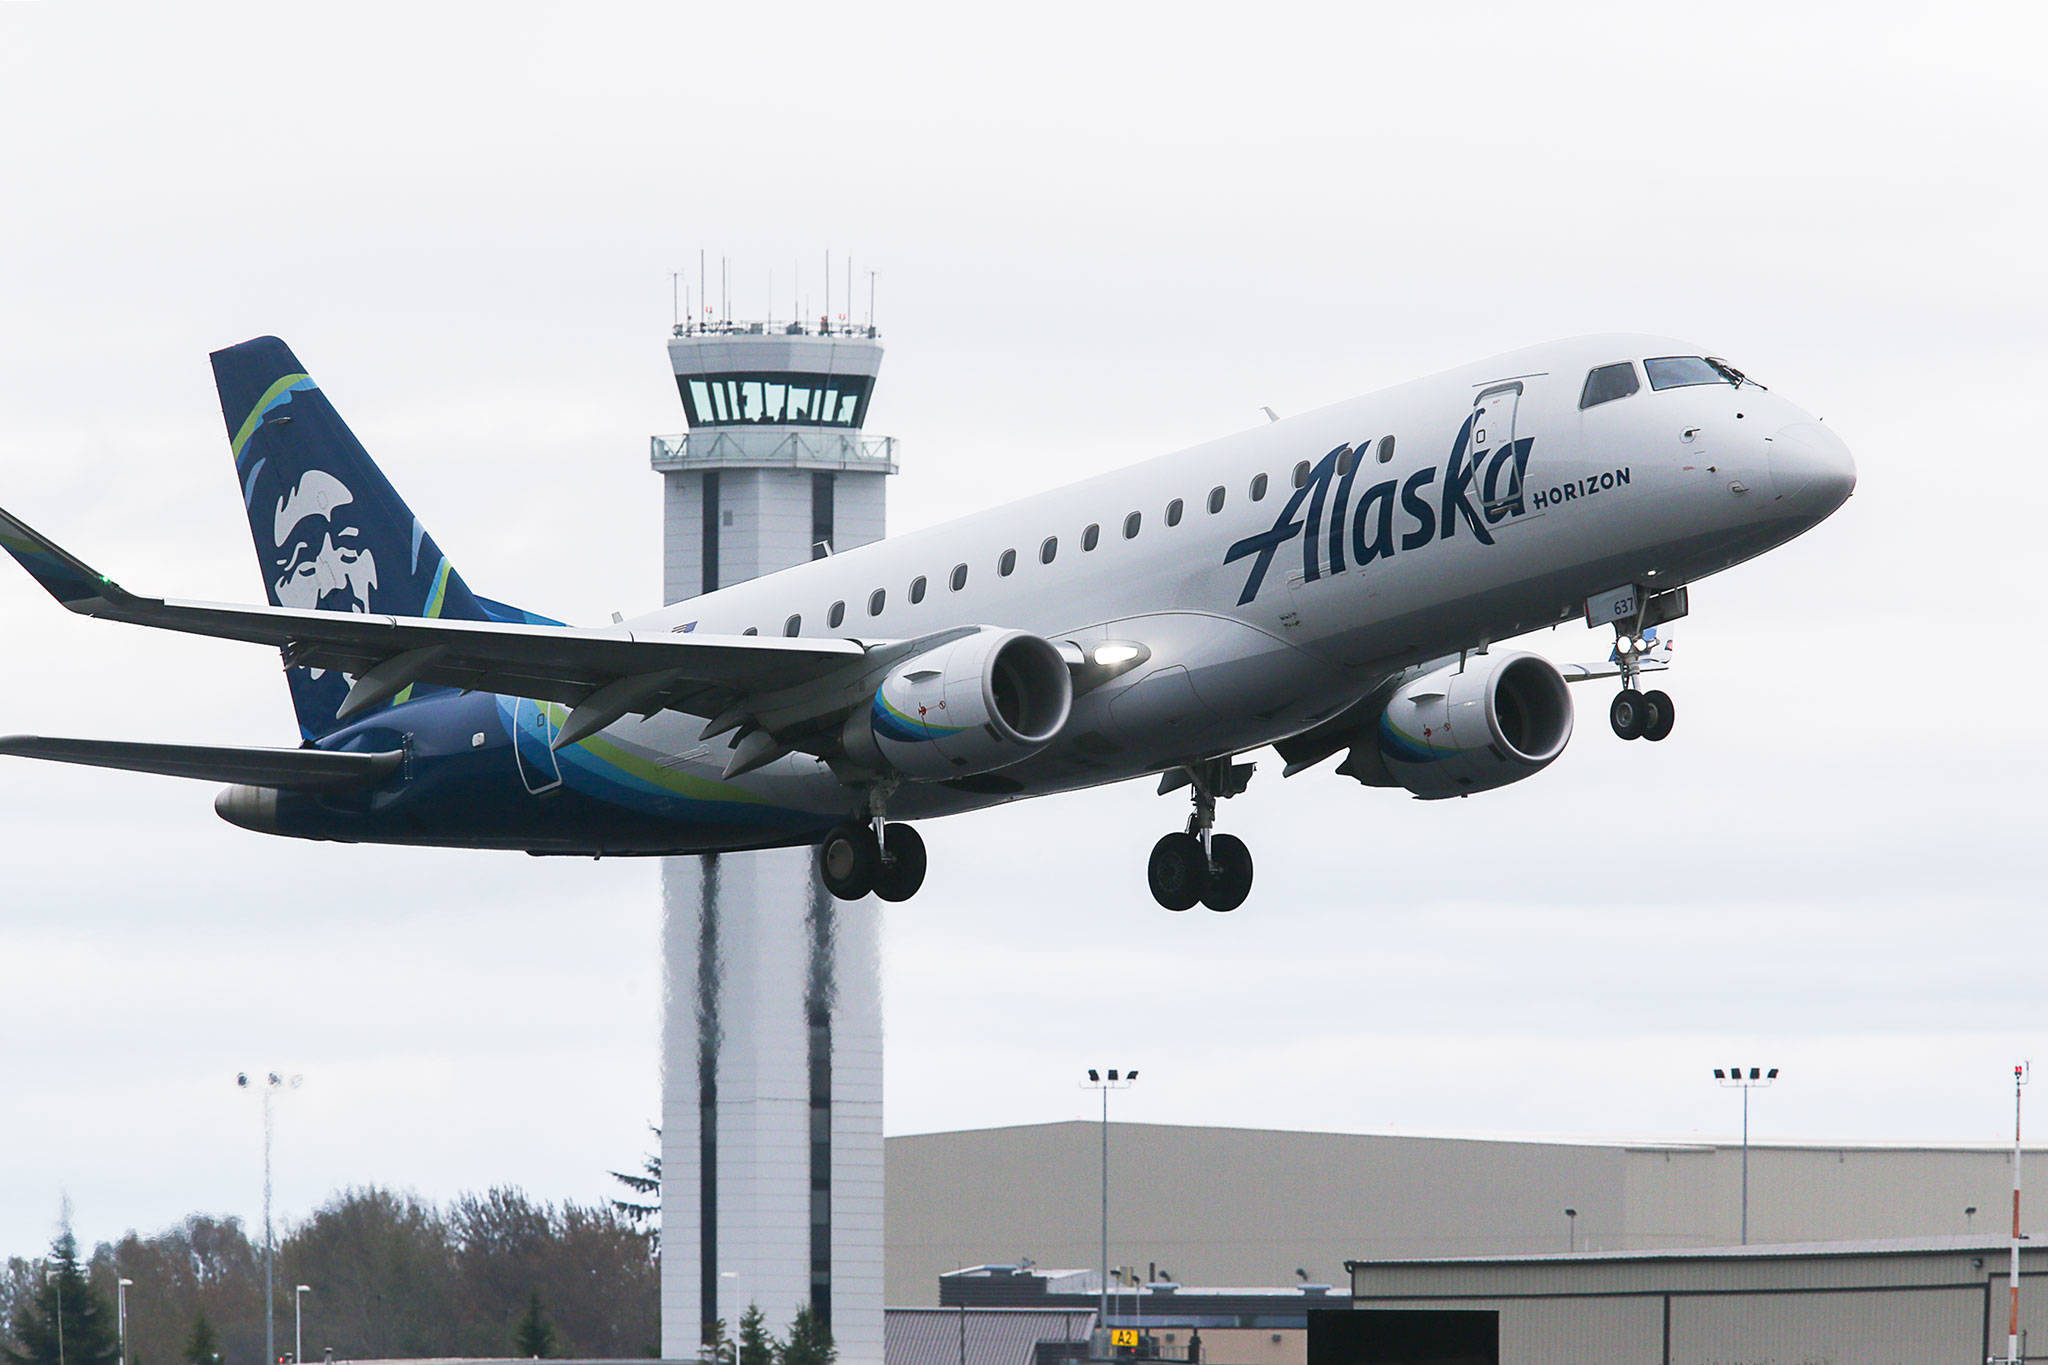 An Alaska Airlines plane takes off from Paine Field on Wednesday in Everett. (Andy Bronson / The Herald)                                An Alaska Airlines plane takes off from Paine Field on Wednesday in Everett. (Andy Bronson / The Herald)